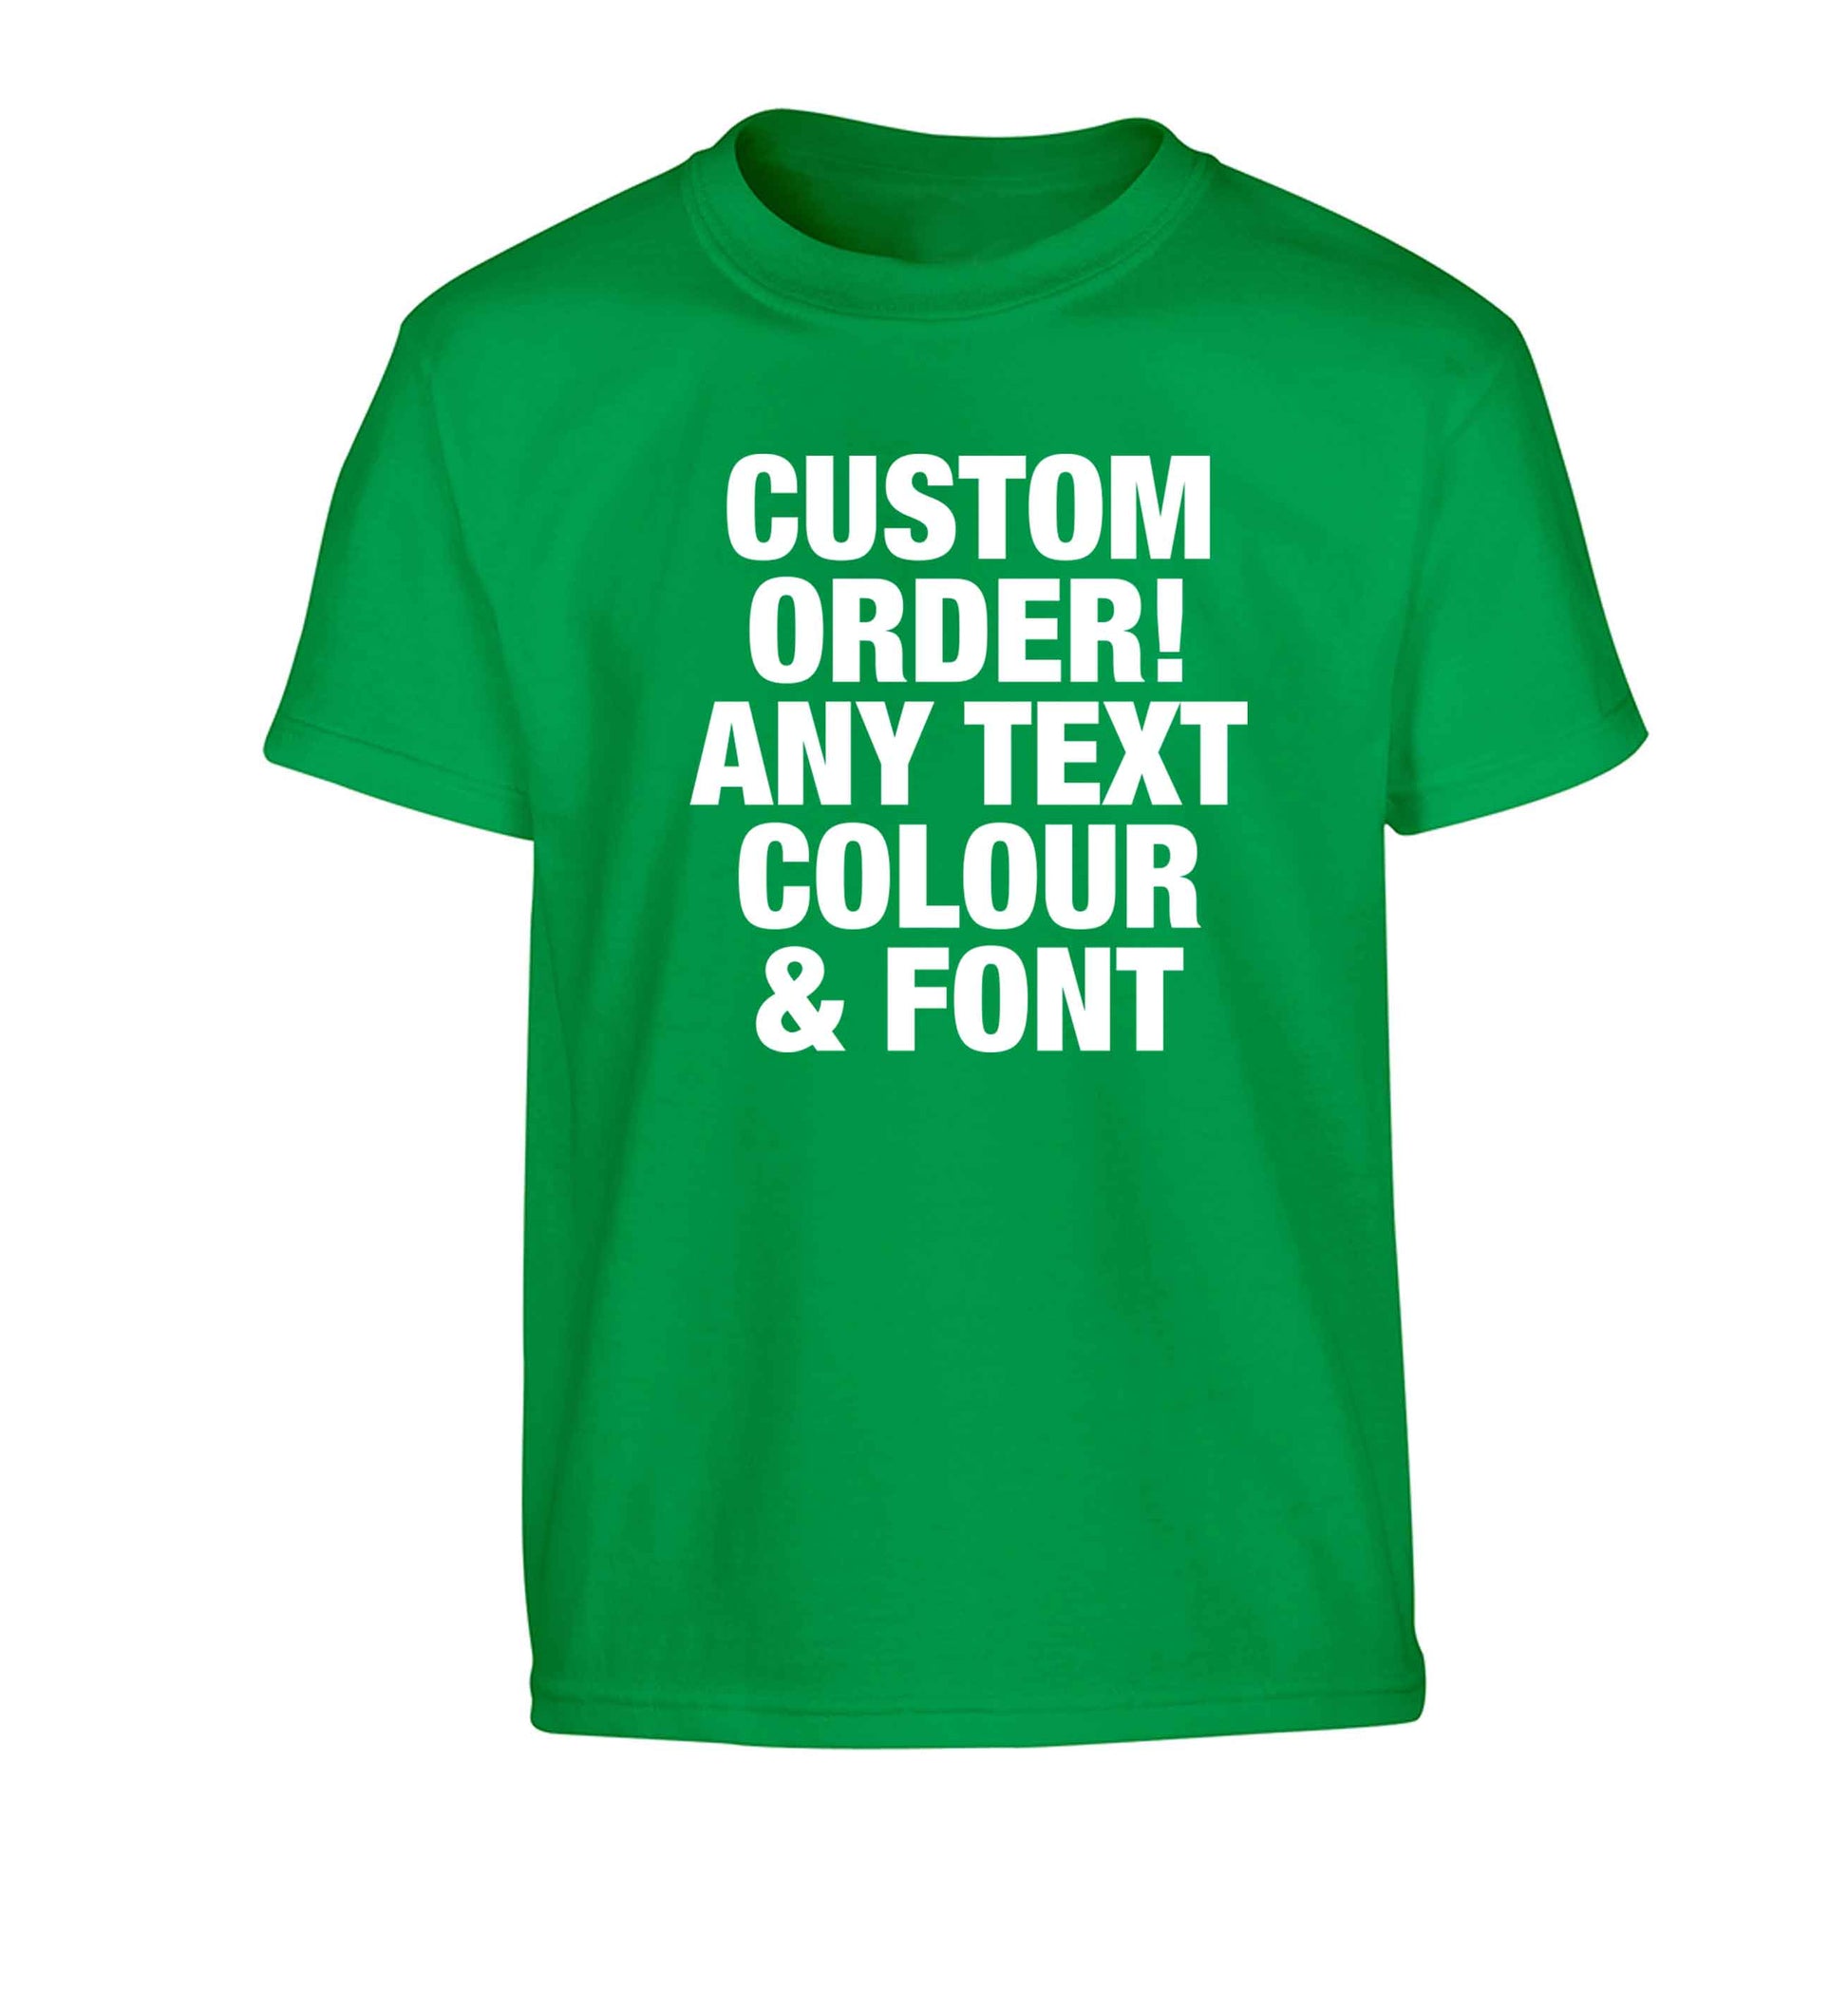 Custom order any text colour and font Children's green Tshirt 12-13 Years